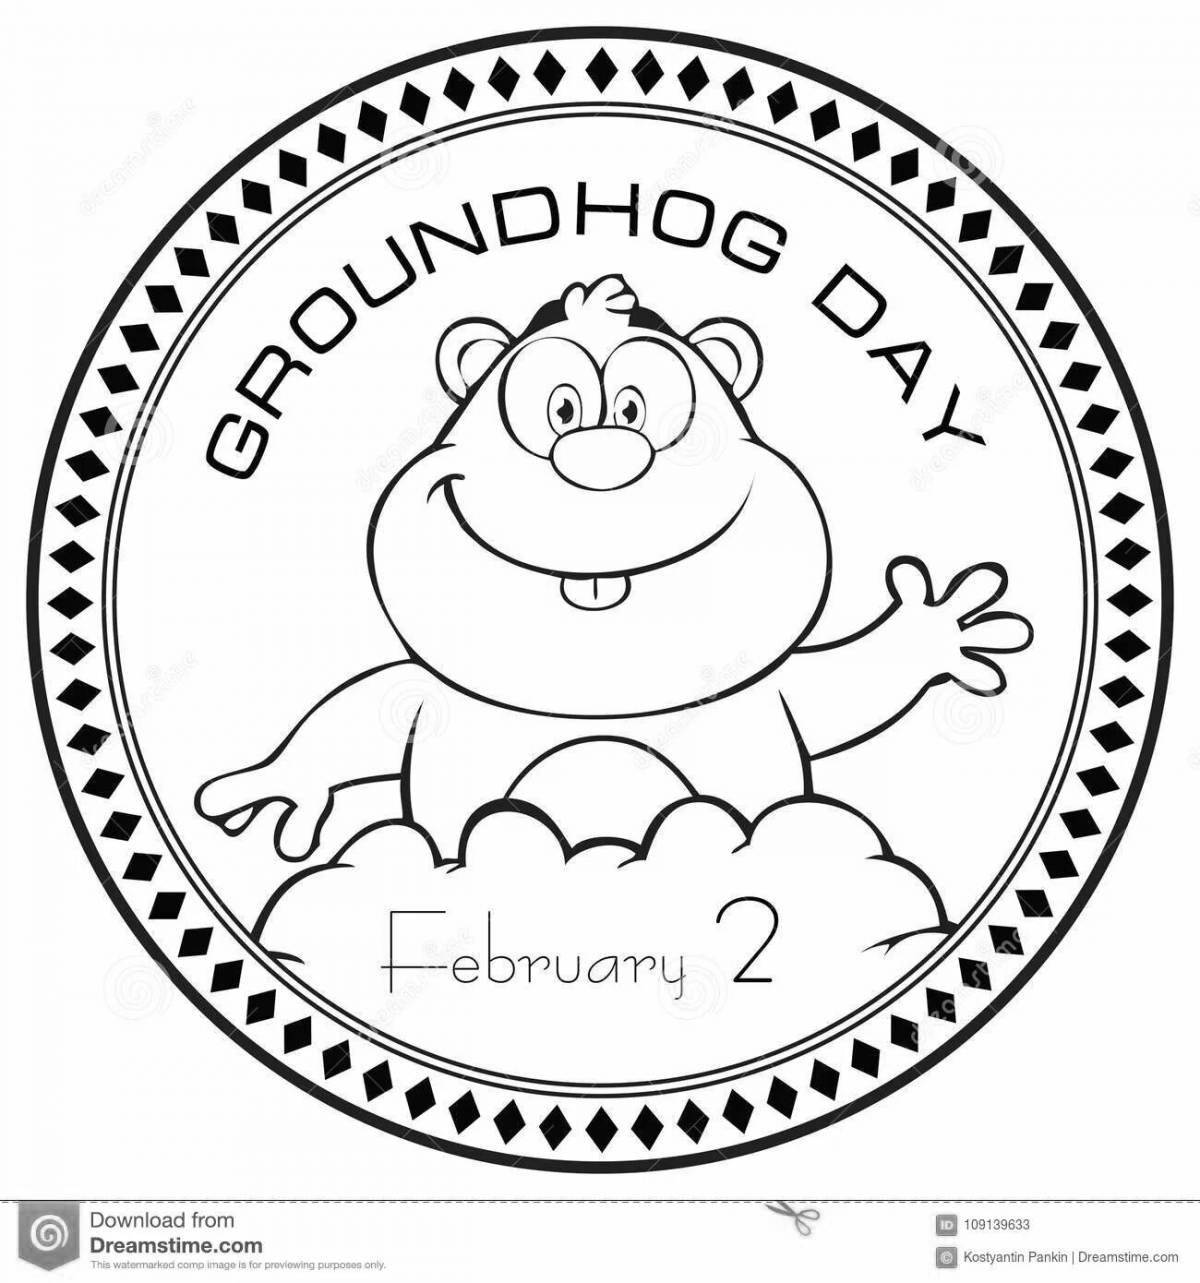 Adorable groundhog day coloring book